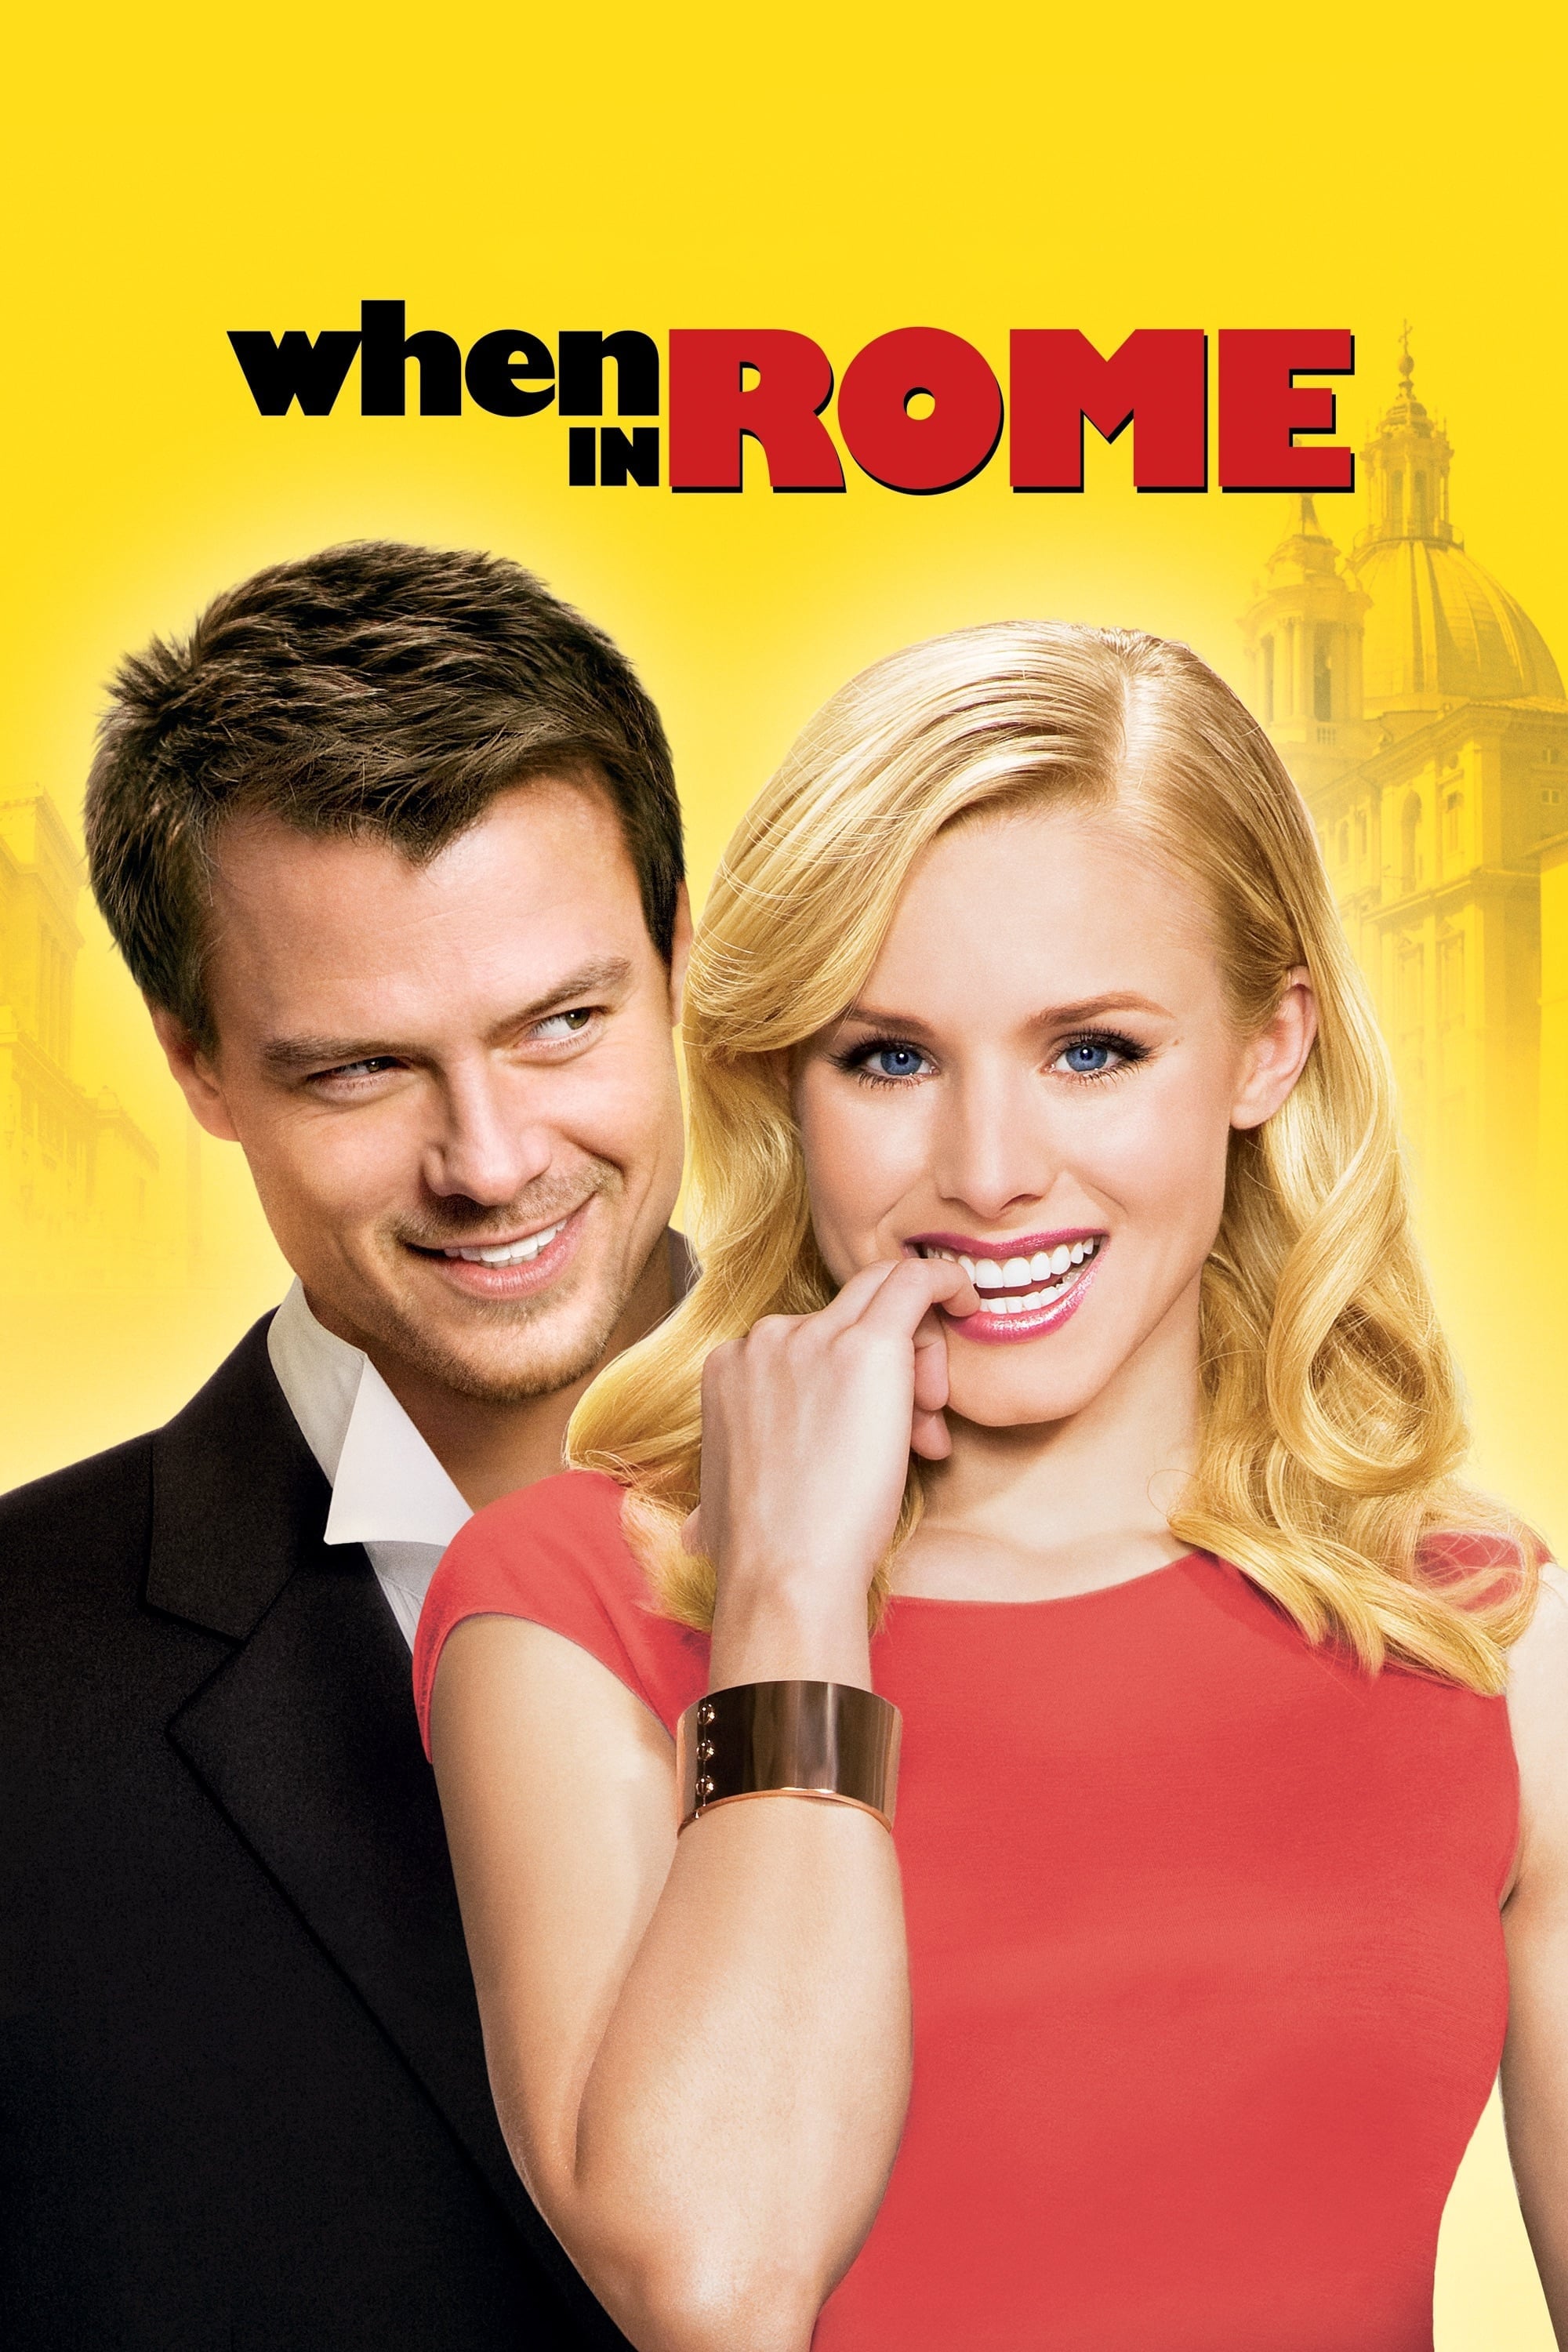 breaking up in rome movie review